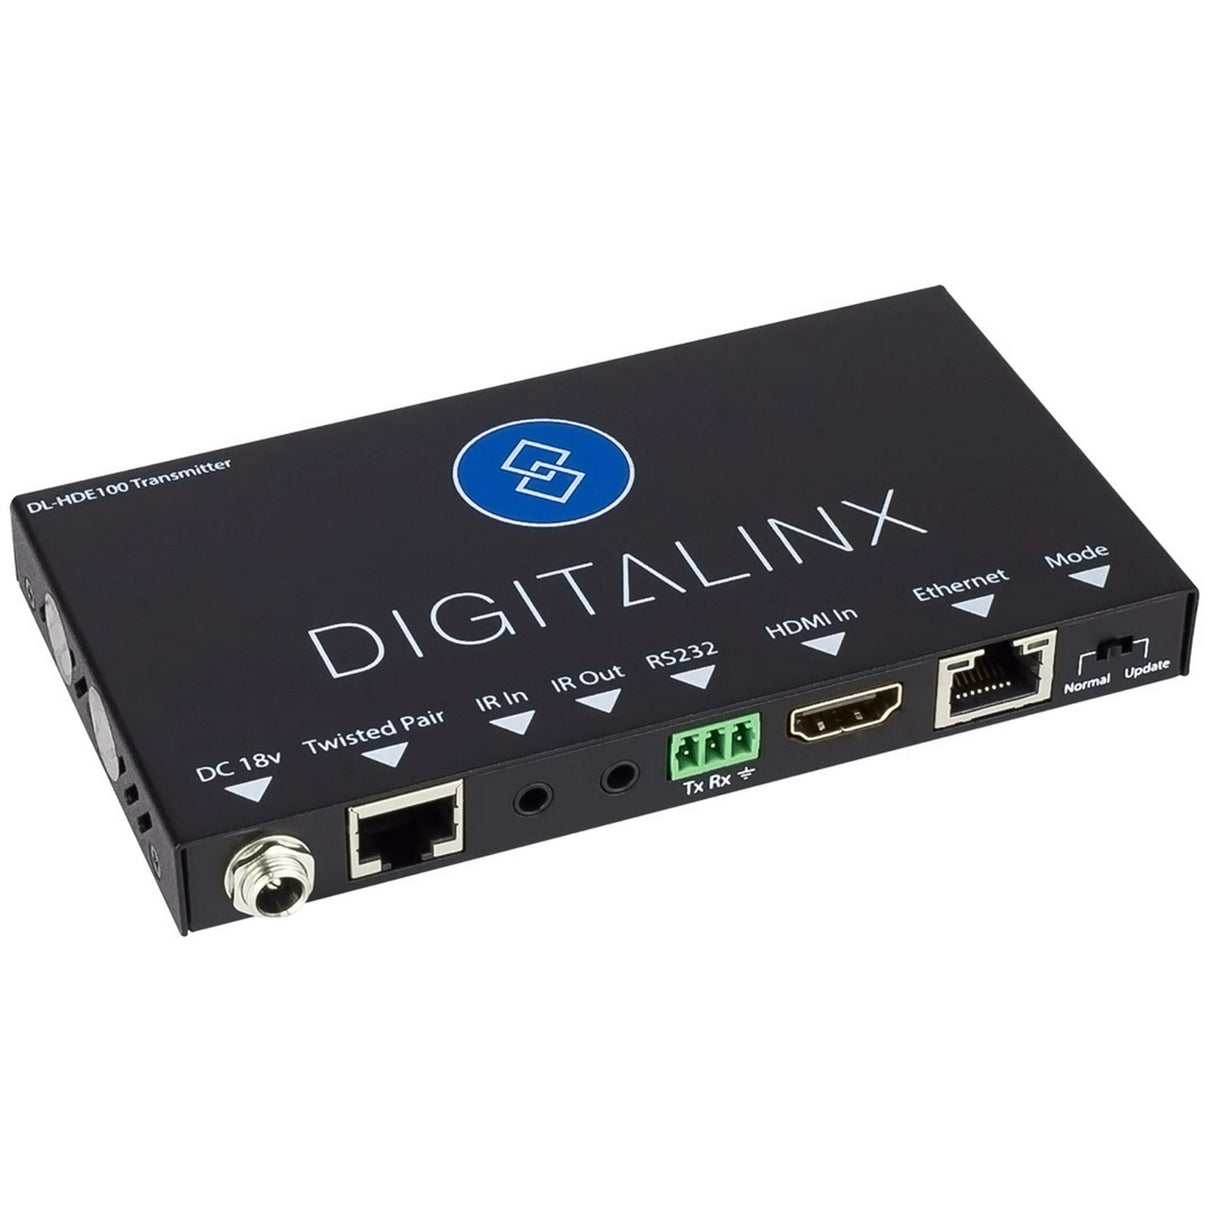 DigitaLinx DL-HDE100 10.2G HDMI HDBaseT Extension Set with Control and Ethernet